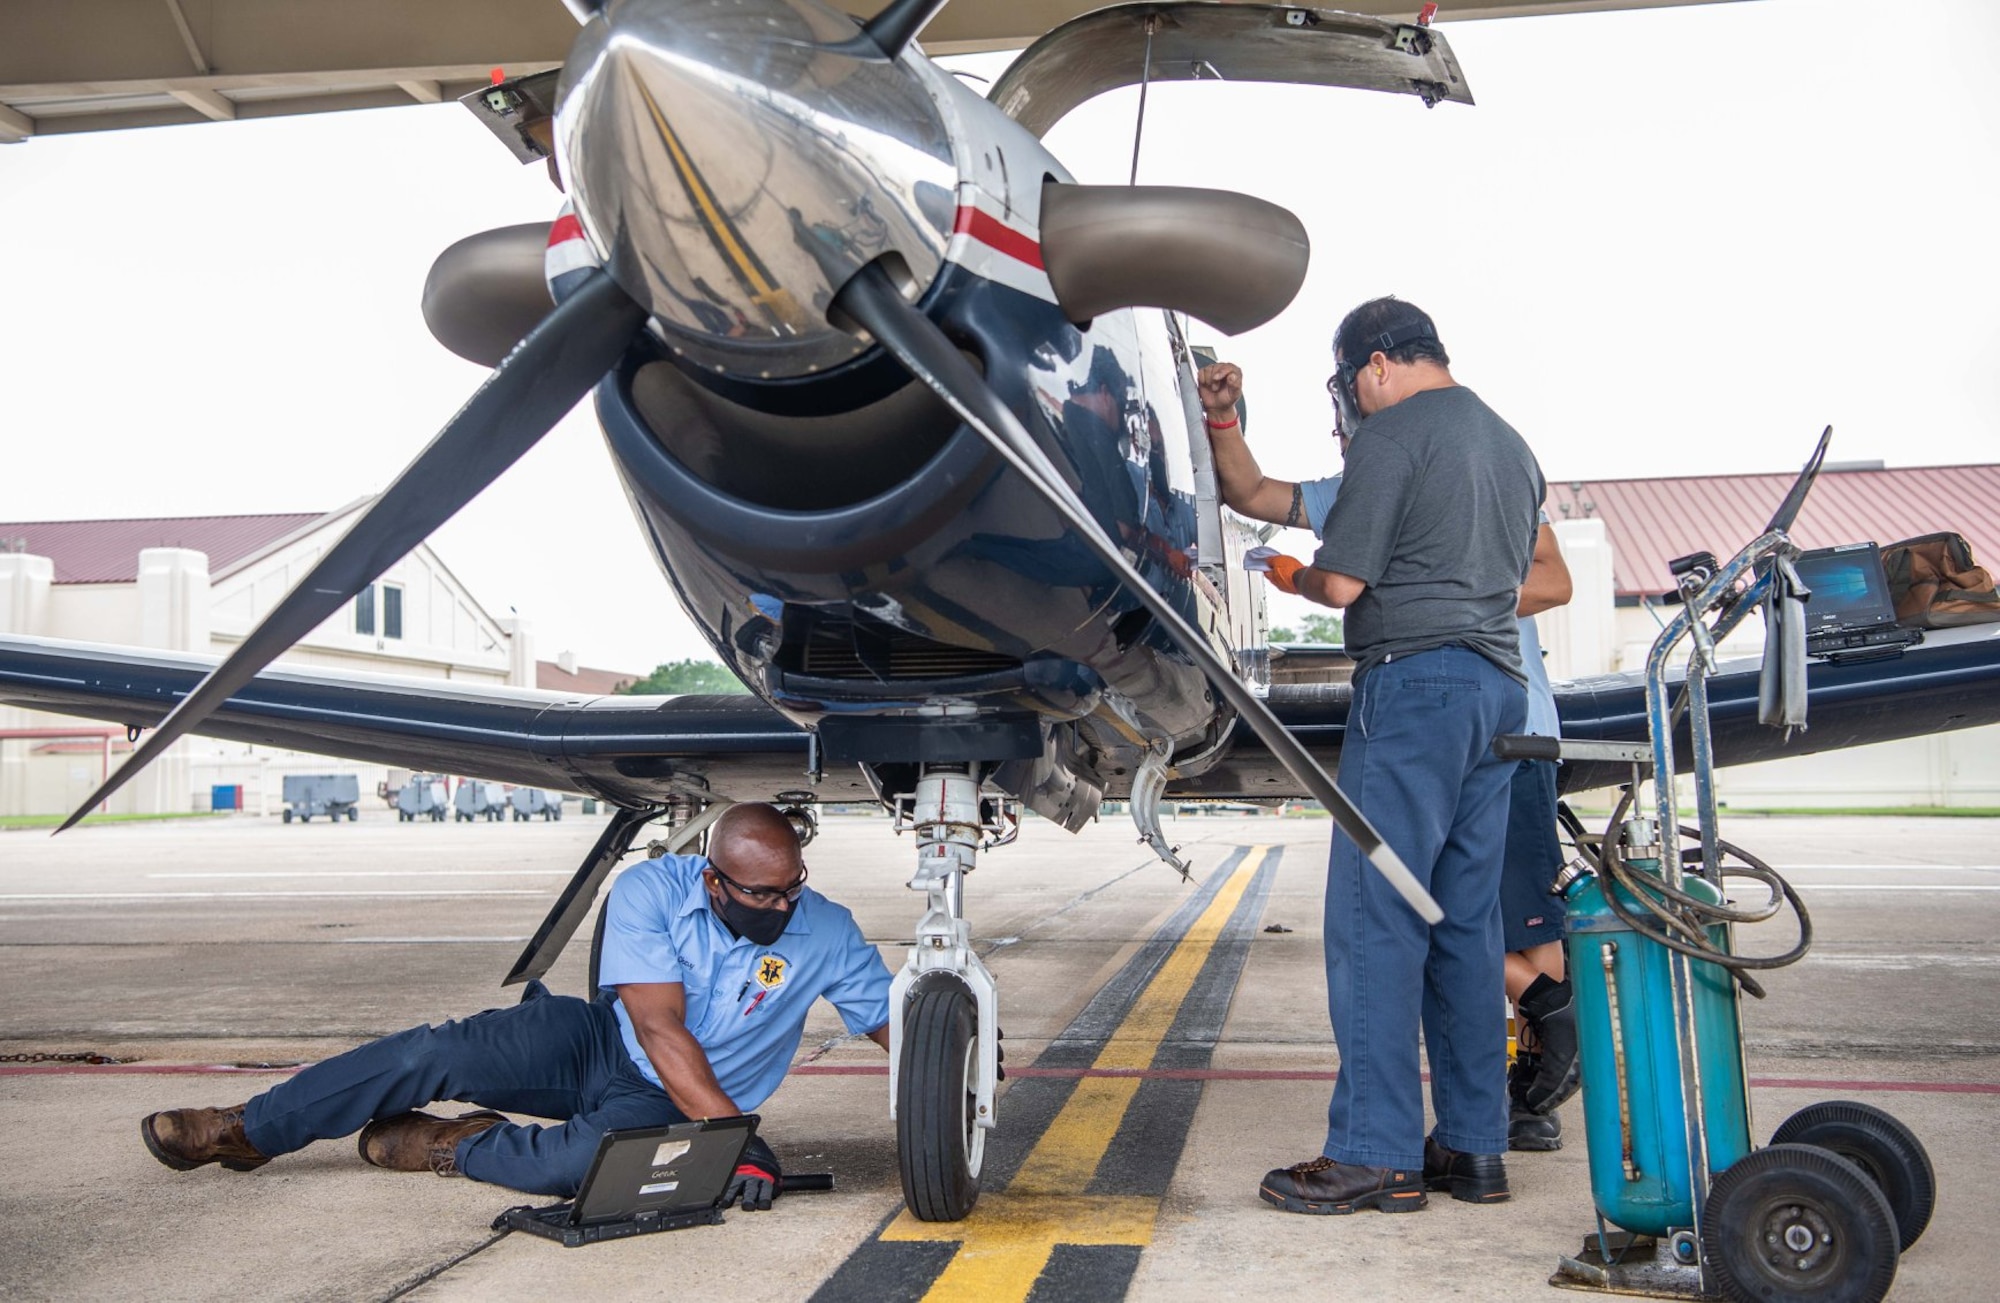 Shevon Vacianna, 12th Aircraft Maintenance Squadron, conducts routine maintenance by inspecting the front tire of a T-6 Texan aircraft at Joint Base San Antonio-Randolph April 7.